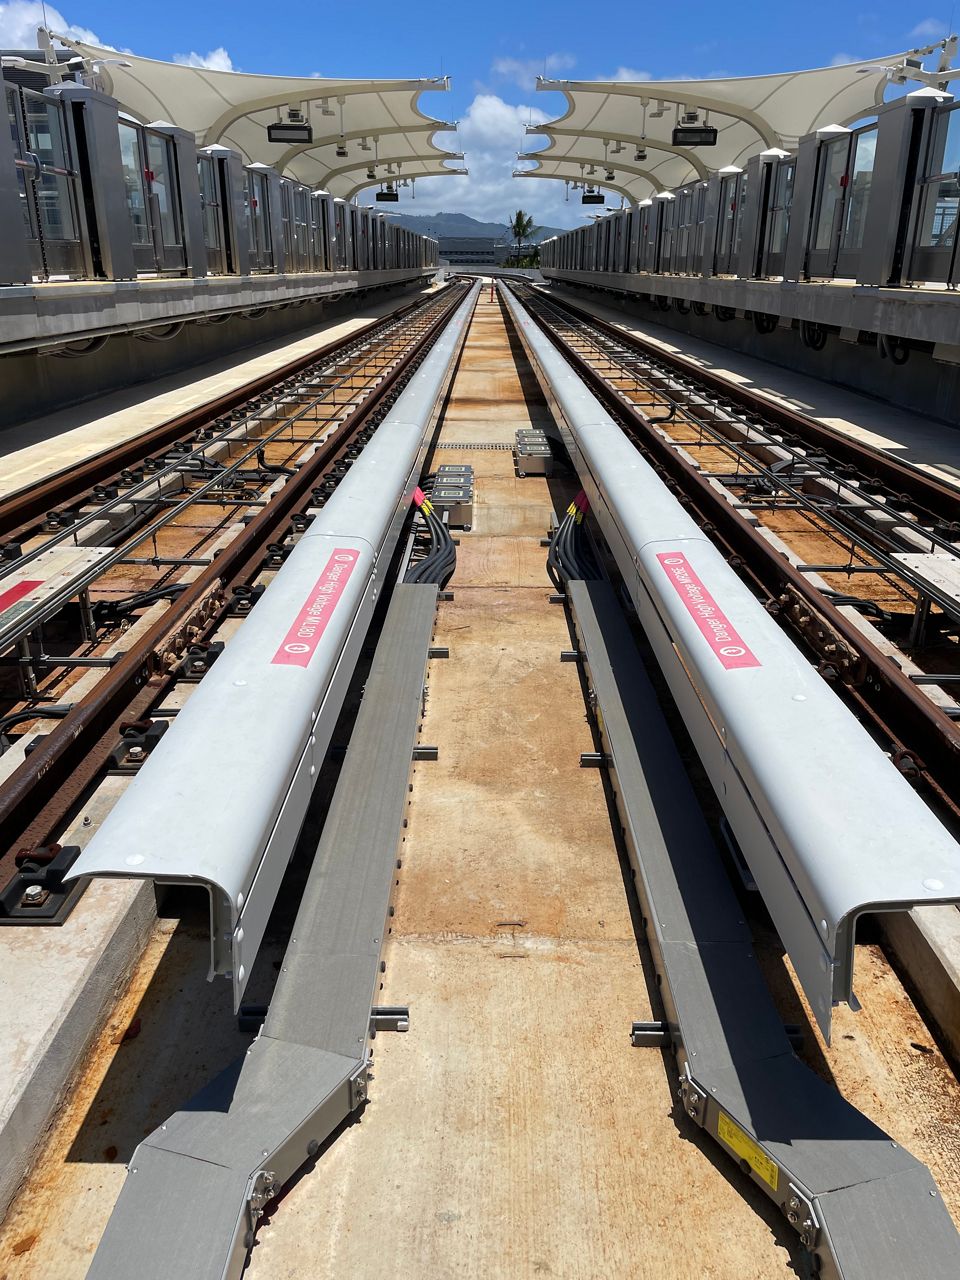 The trains’ wheels each sit on a rail (two rails) and a third rail powers the train when energized. (Photo courtesy of HART)